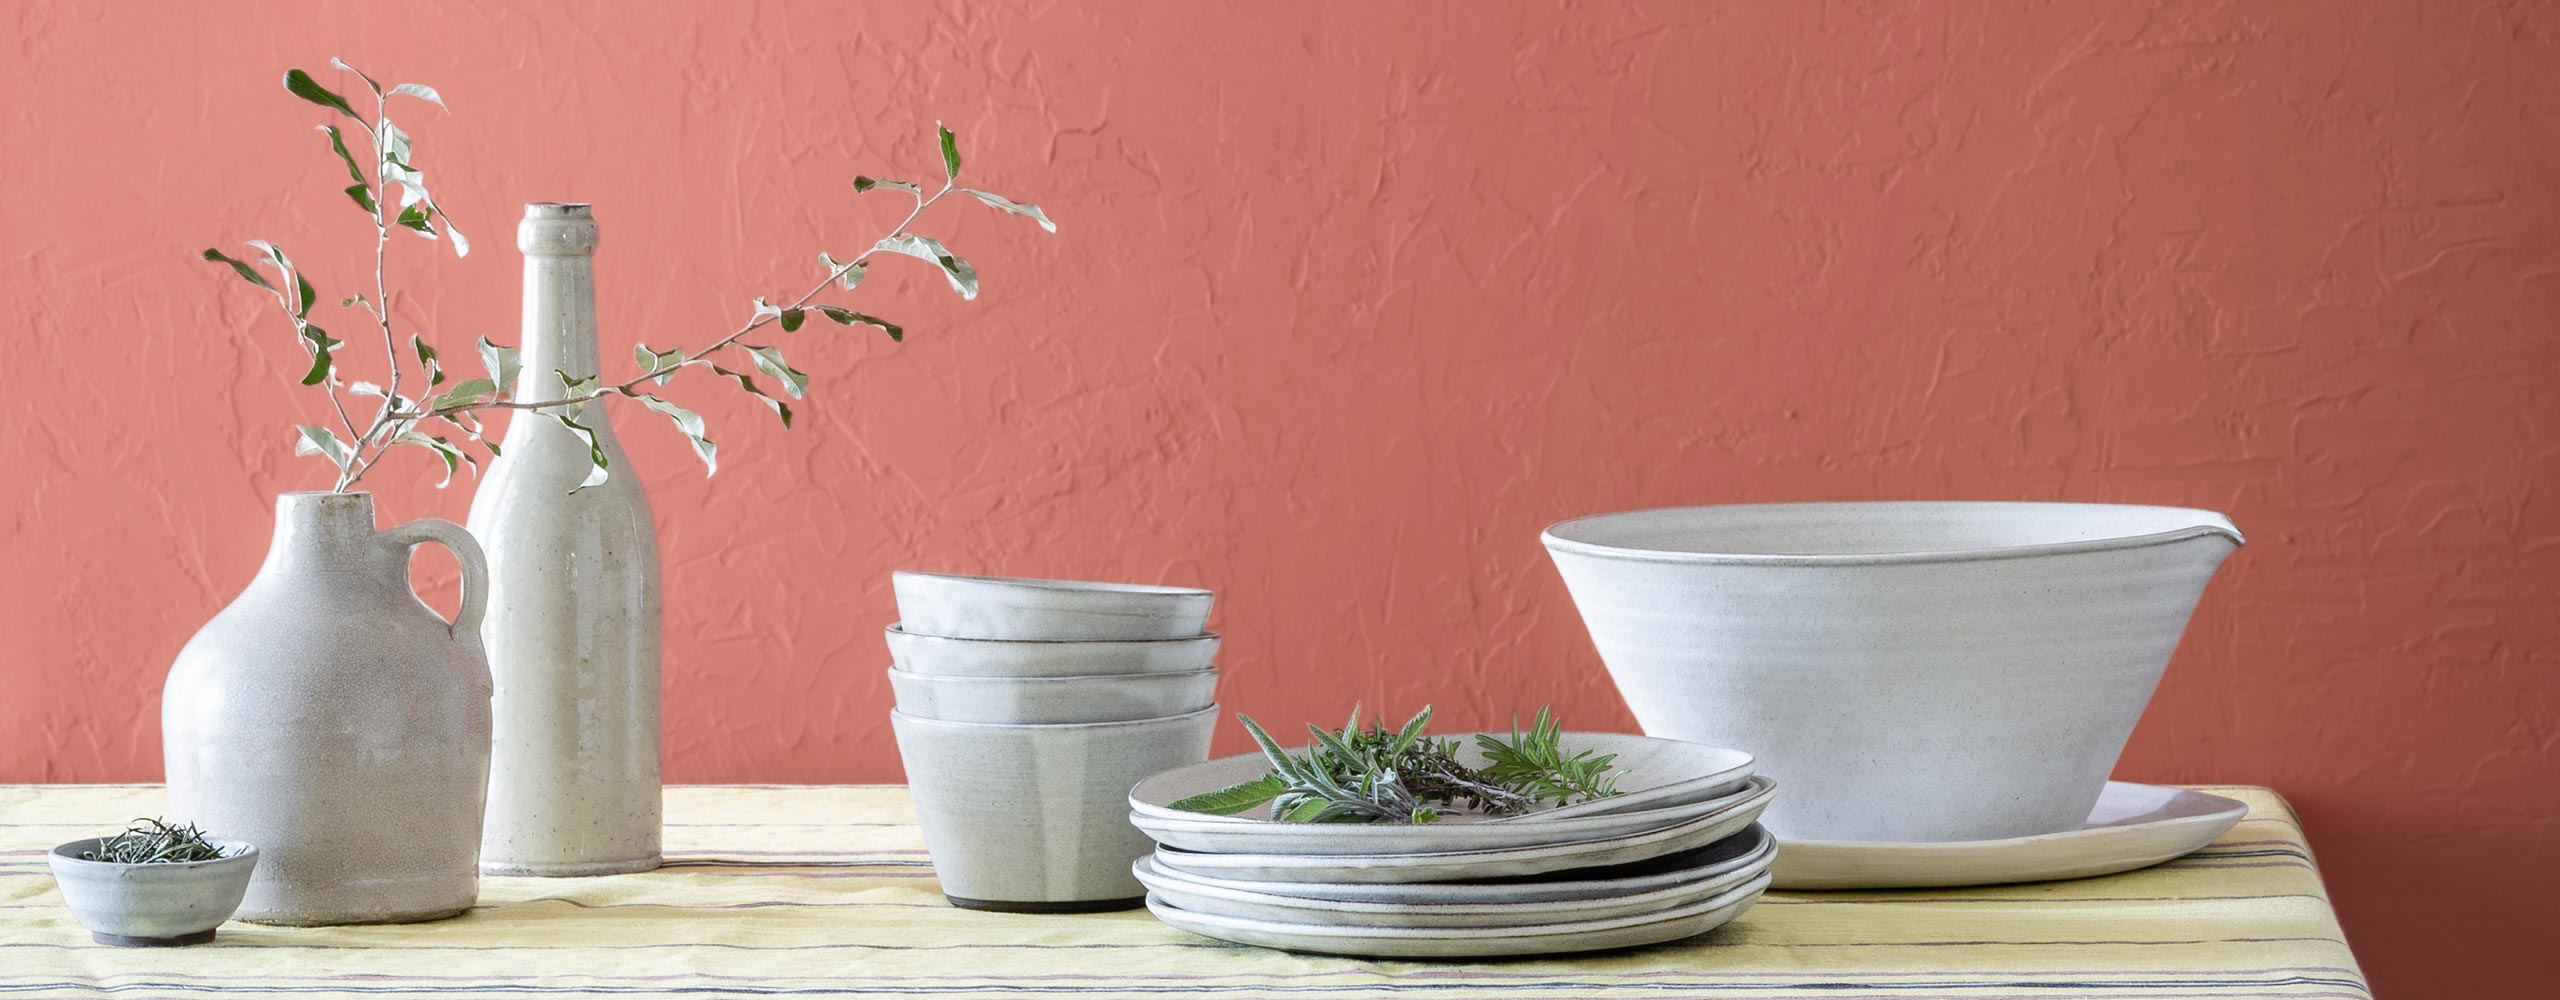 Decorative white vases and serving bowls on a table in front of a wall painted a soft red.